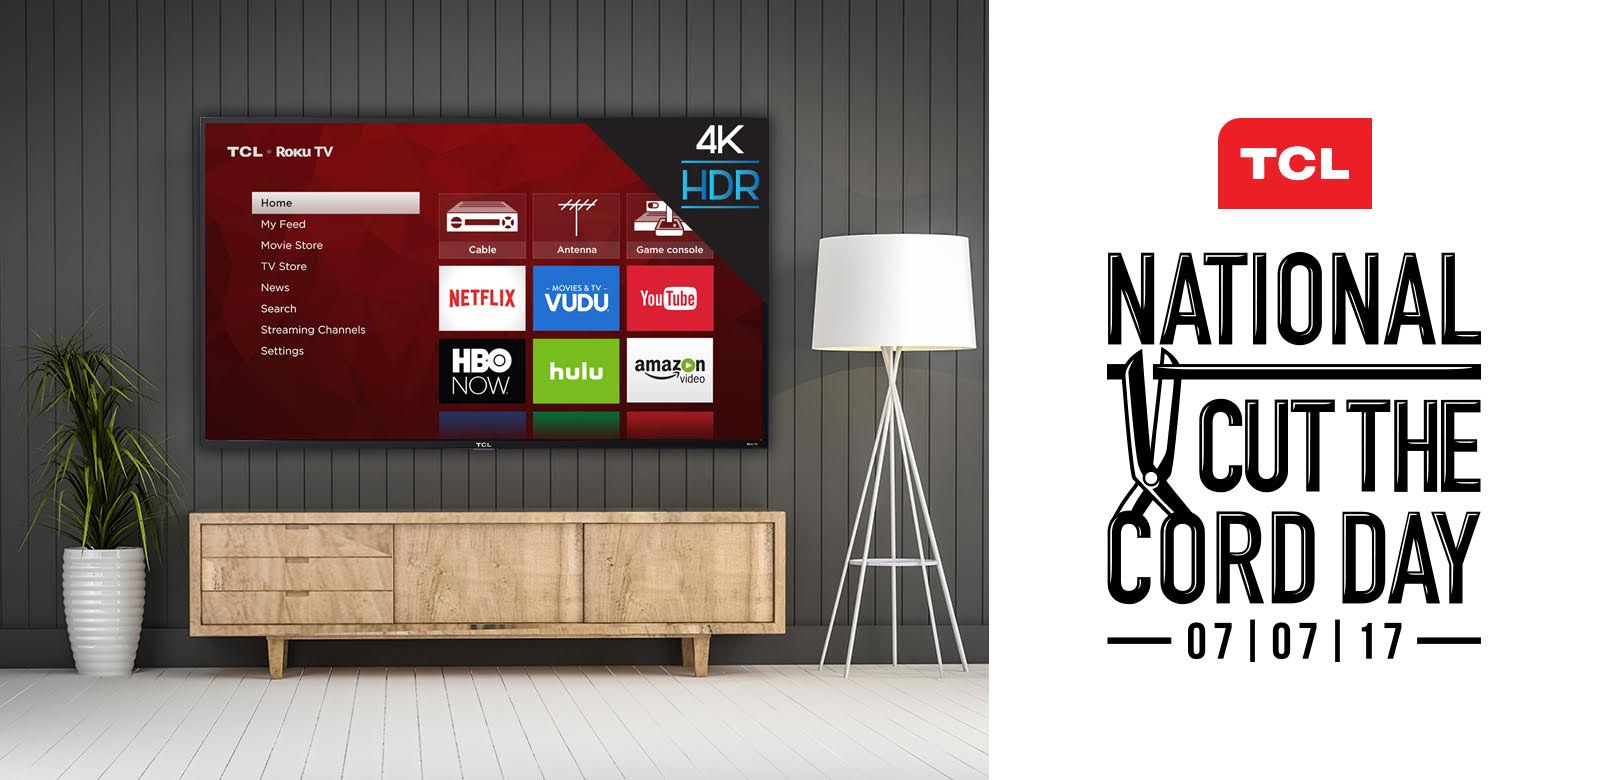 TCL is Celebrating “National Cut The Cord Day” With a Special Deal For Cord Cutters